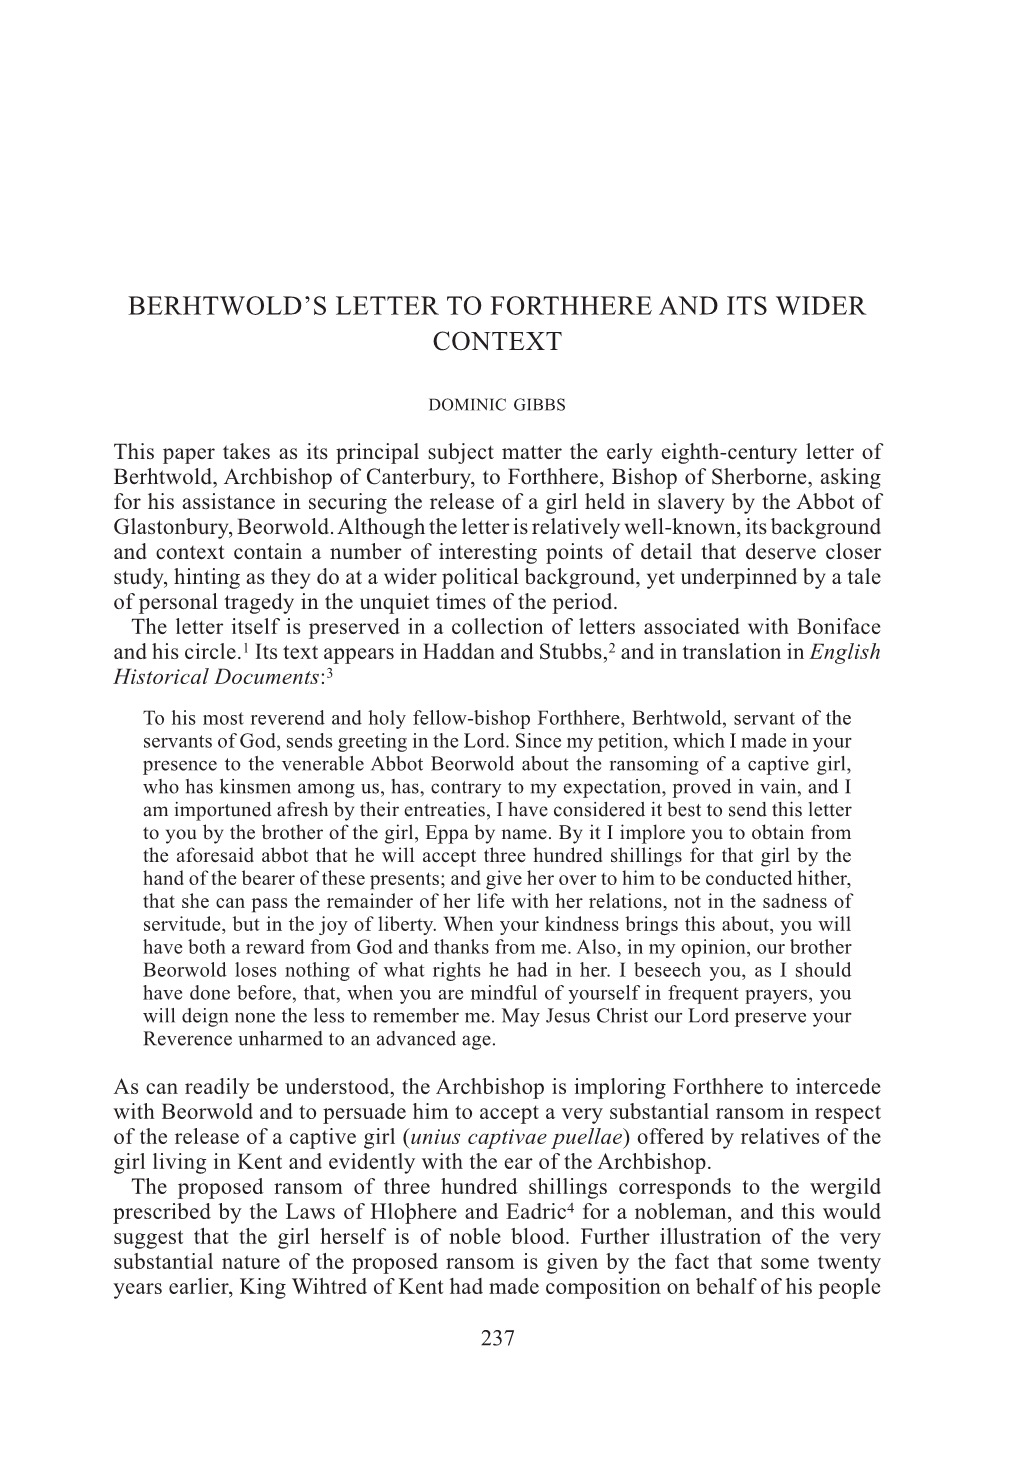 Berhtwold's Letter to Forthhere and Its Wider Context